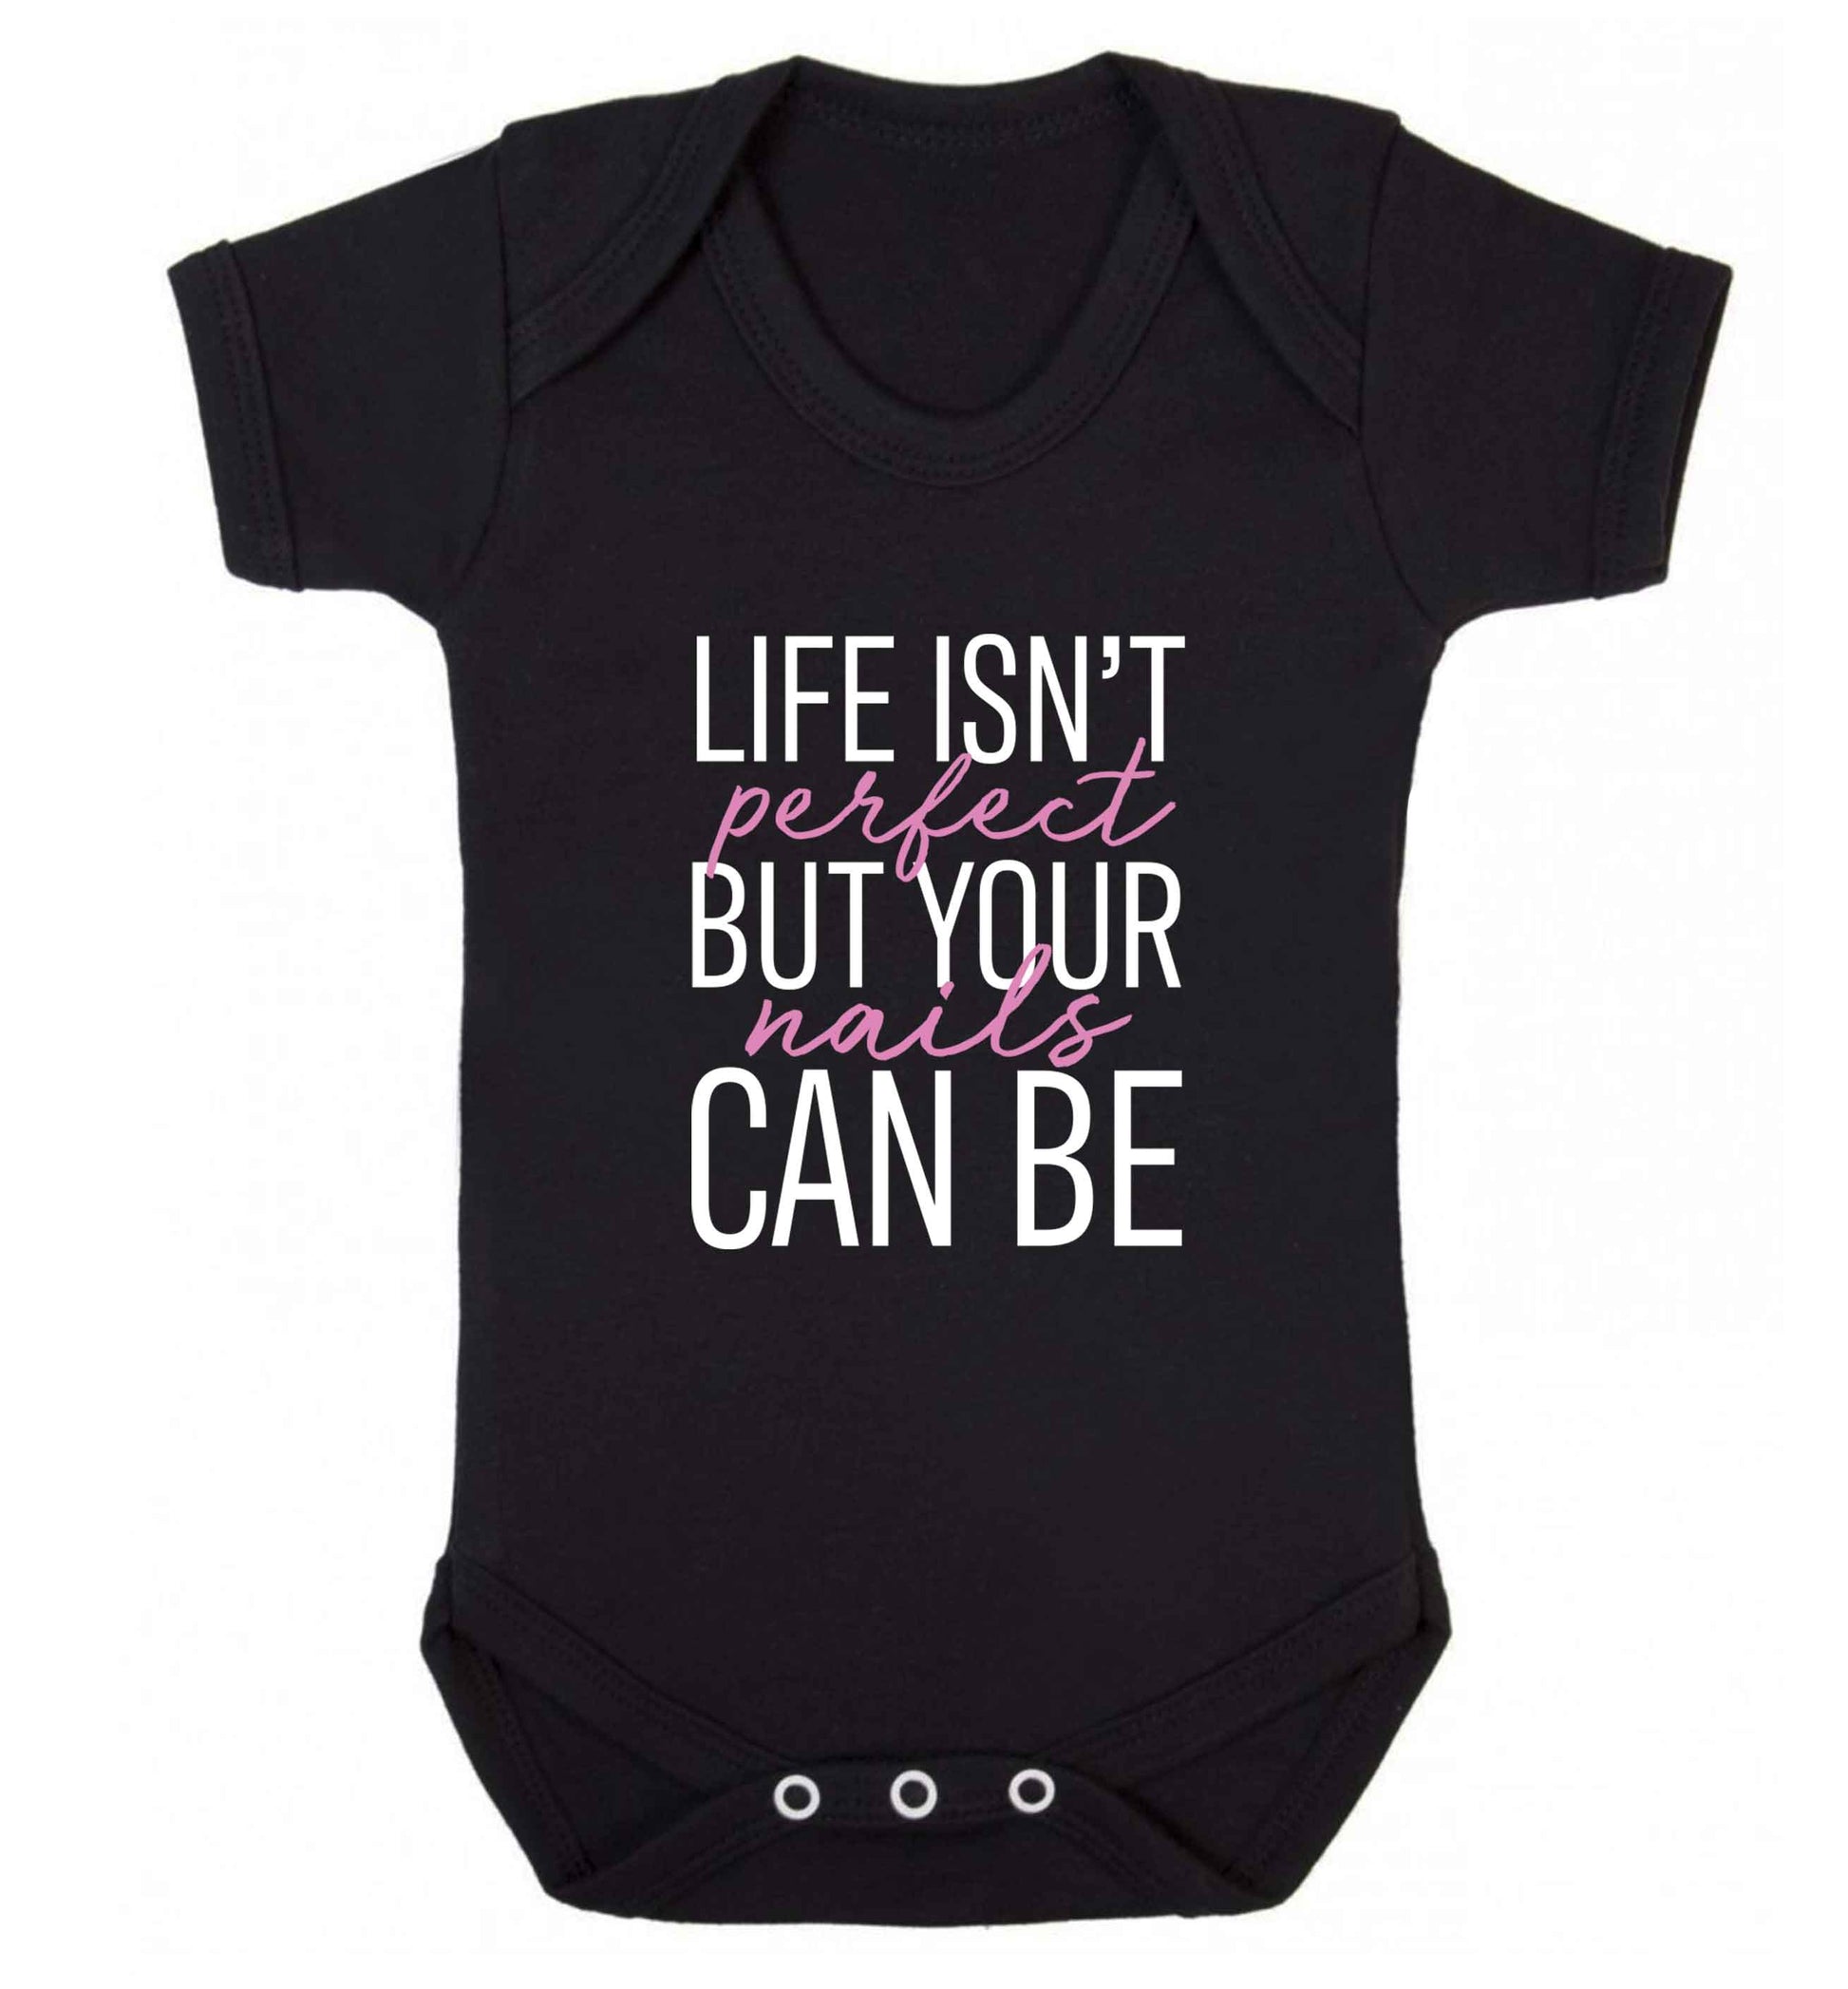 Life isn't perfect but your nails can be baby vest black 18-24 months